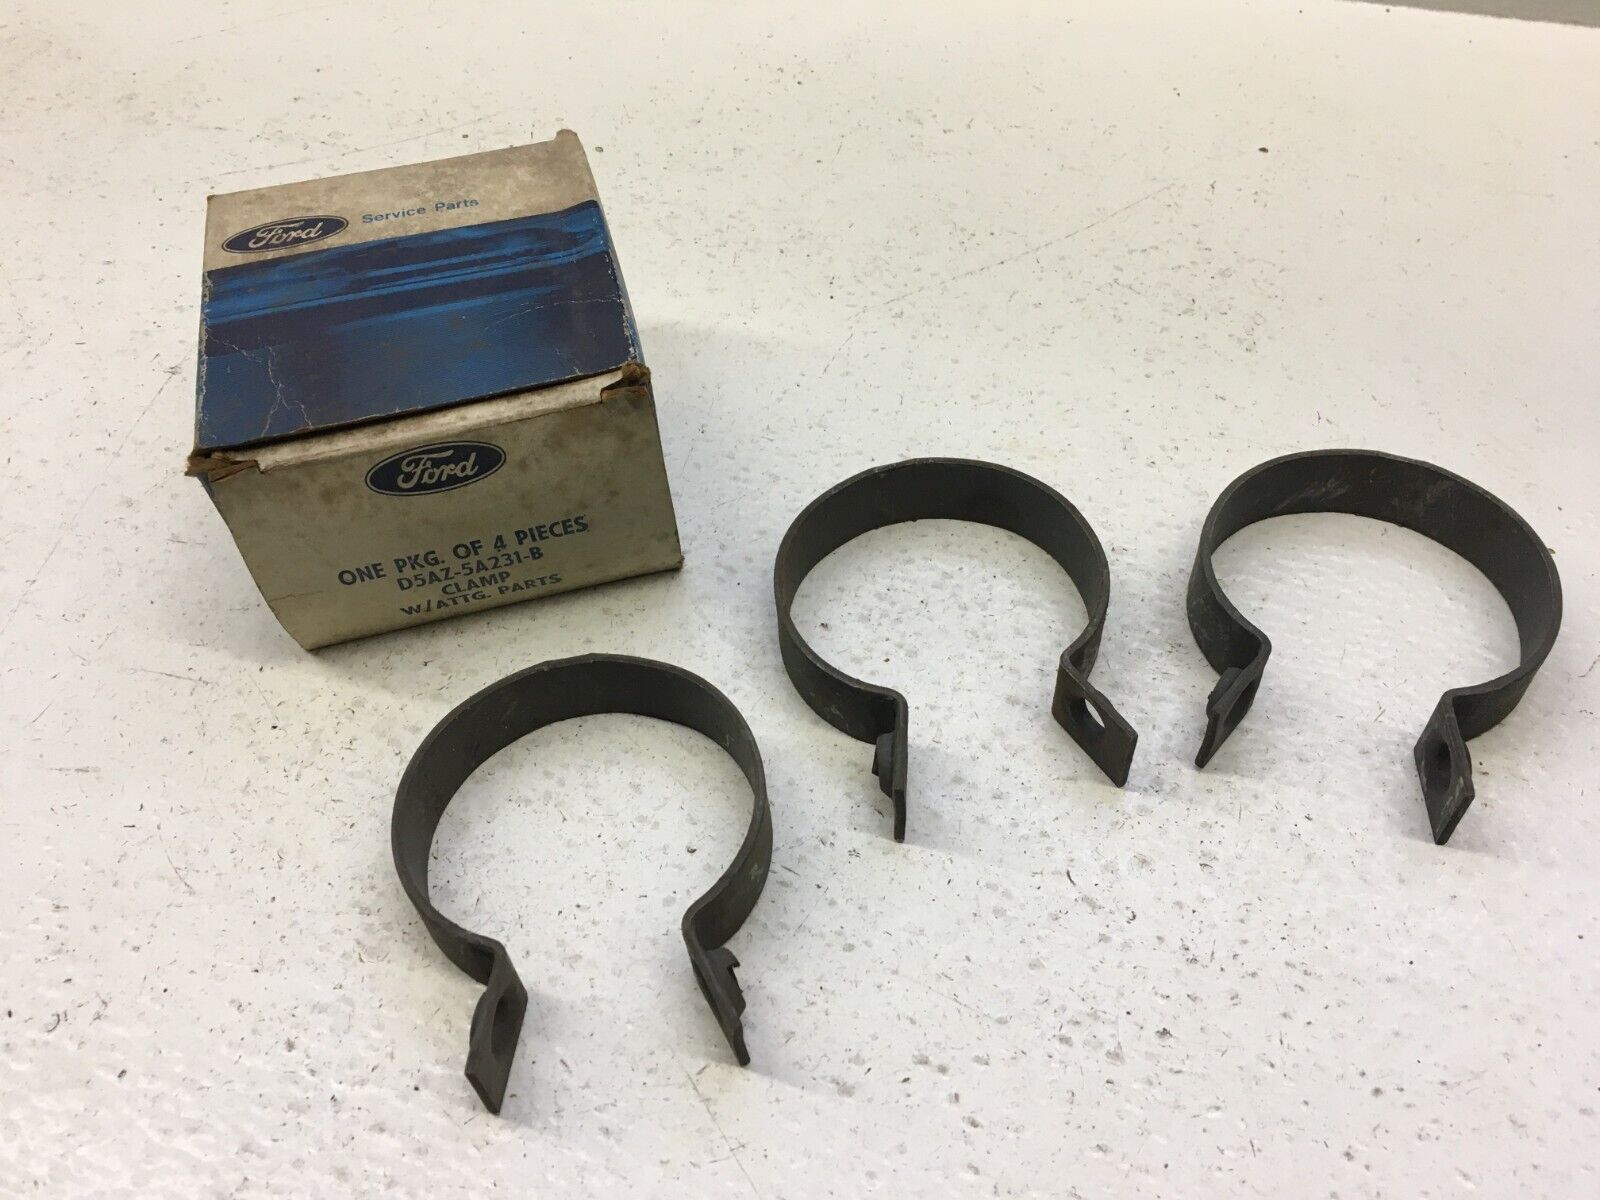 NOS 2¼“ Ford Exhaust Clamps Lot of 3 LTD Bronco Mustang Galaxie Country Squire